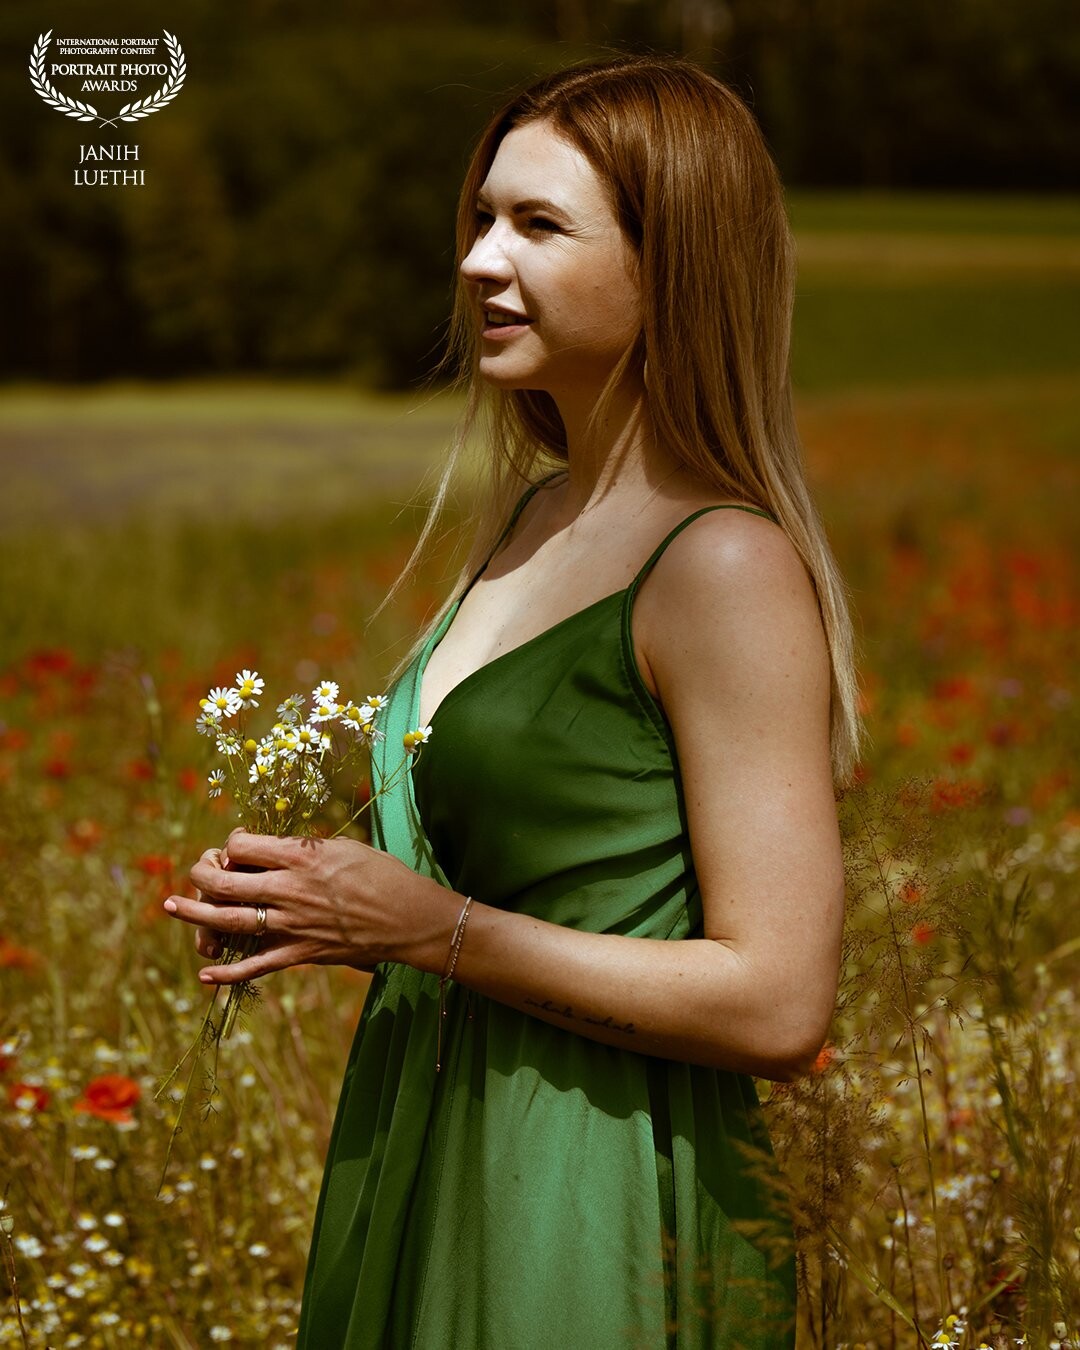 Created in the Poppyfield in Switzerland with my Model and Friend Lynn<br />
I'm very happy about the results.<br />
Many thanks to my Model @lynnclaire_b